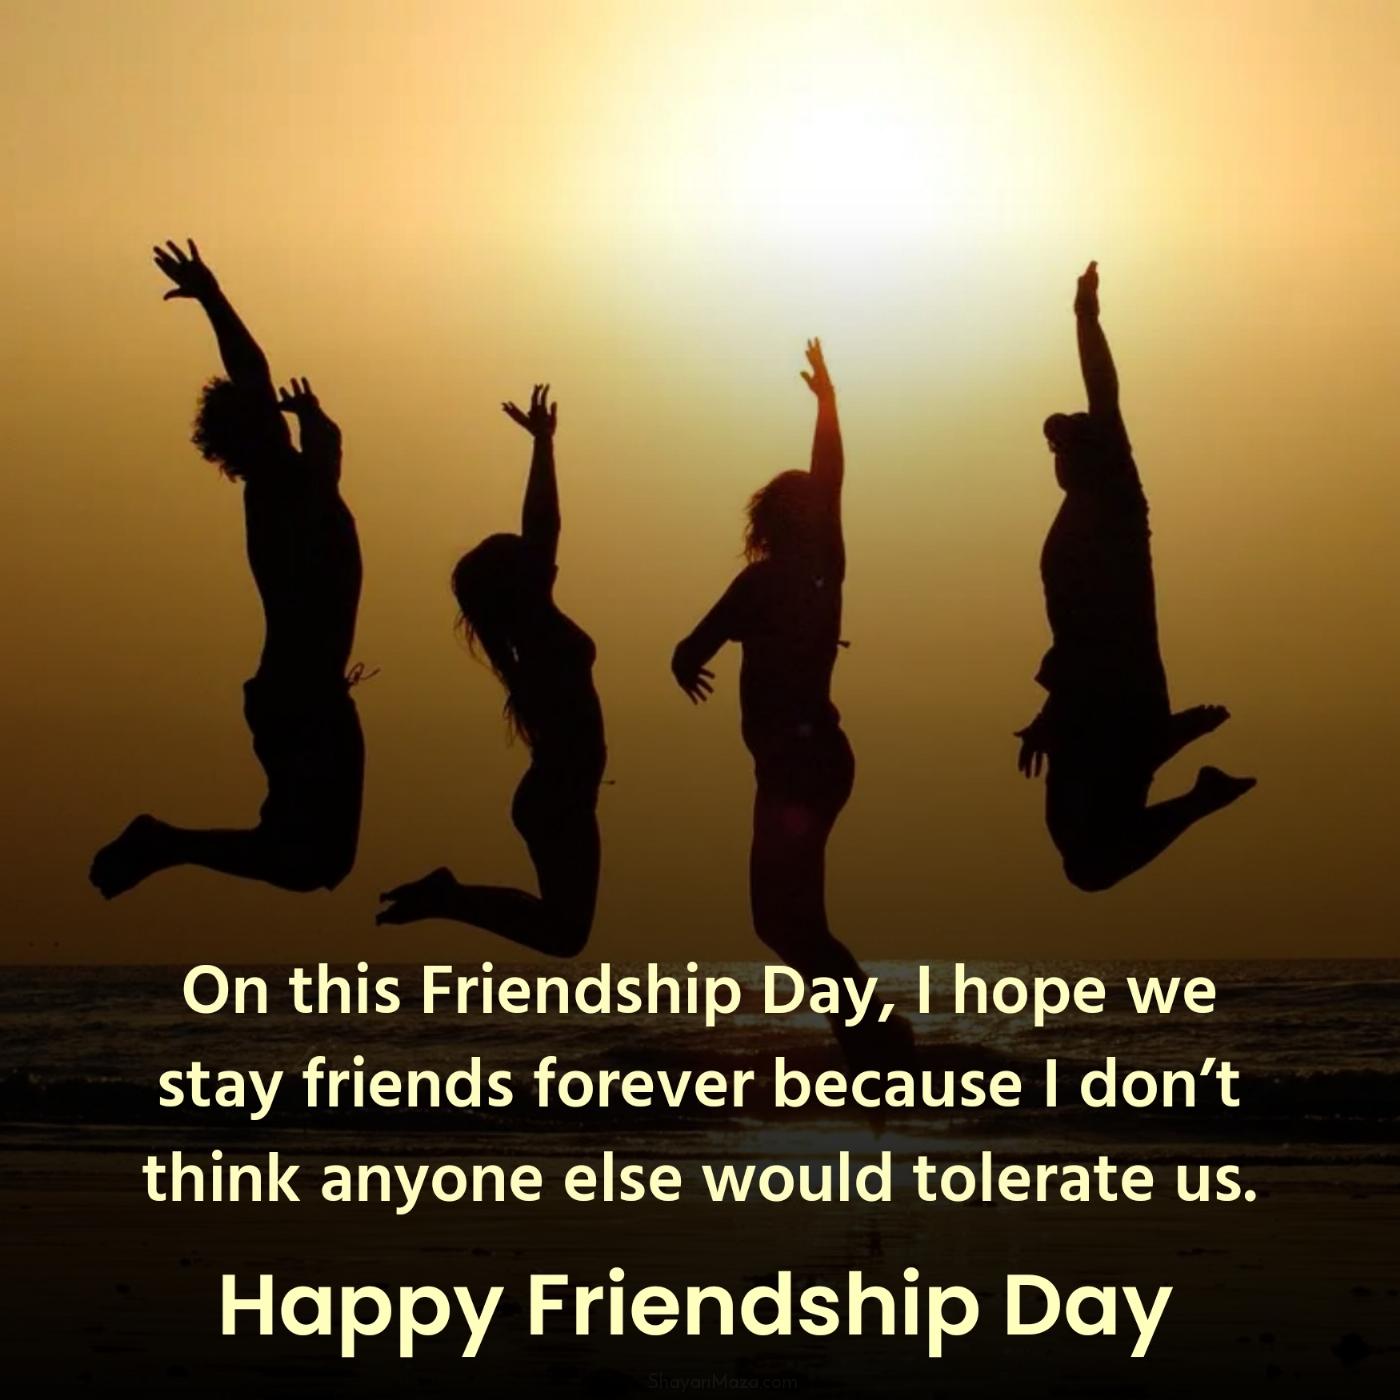 On this Friendship Day I hope we stay friends forever